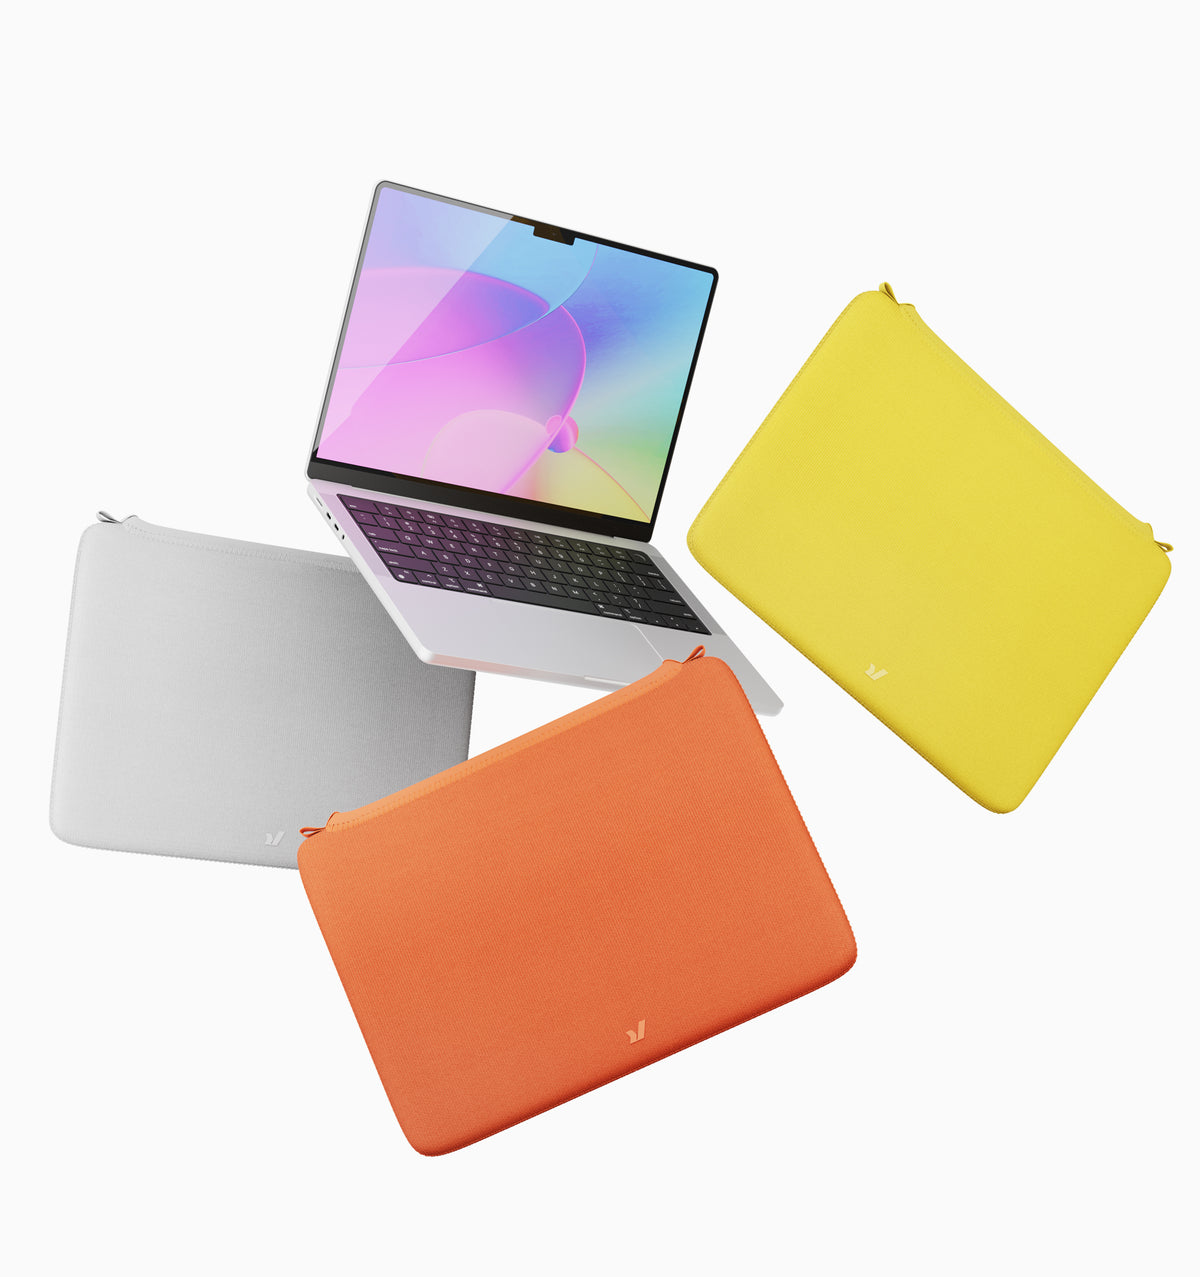 Rushfaster Laptop Sleeve For 13" MacBook Air/Pro - Yellow